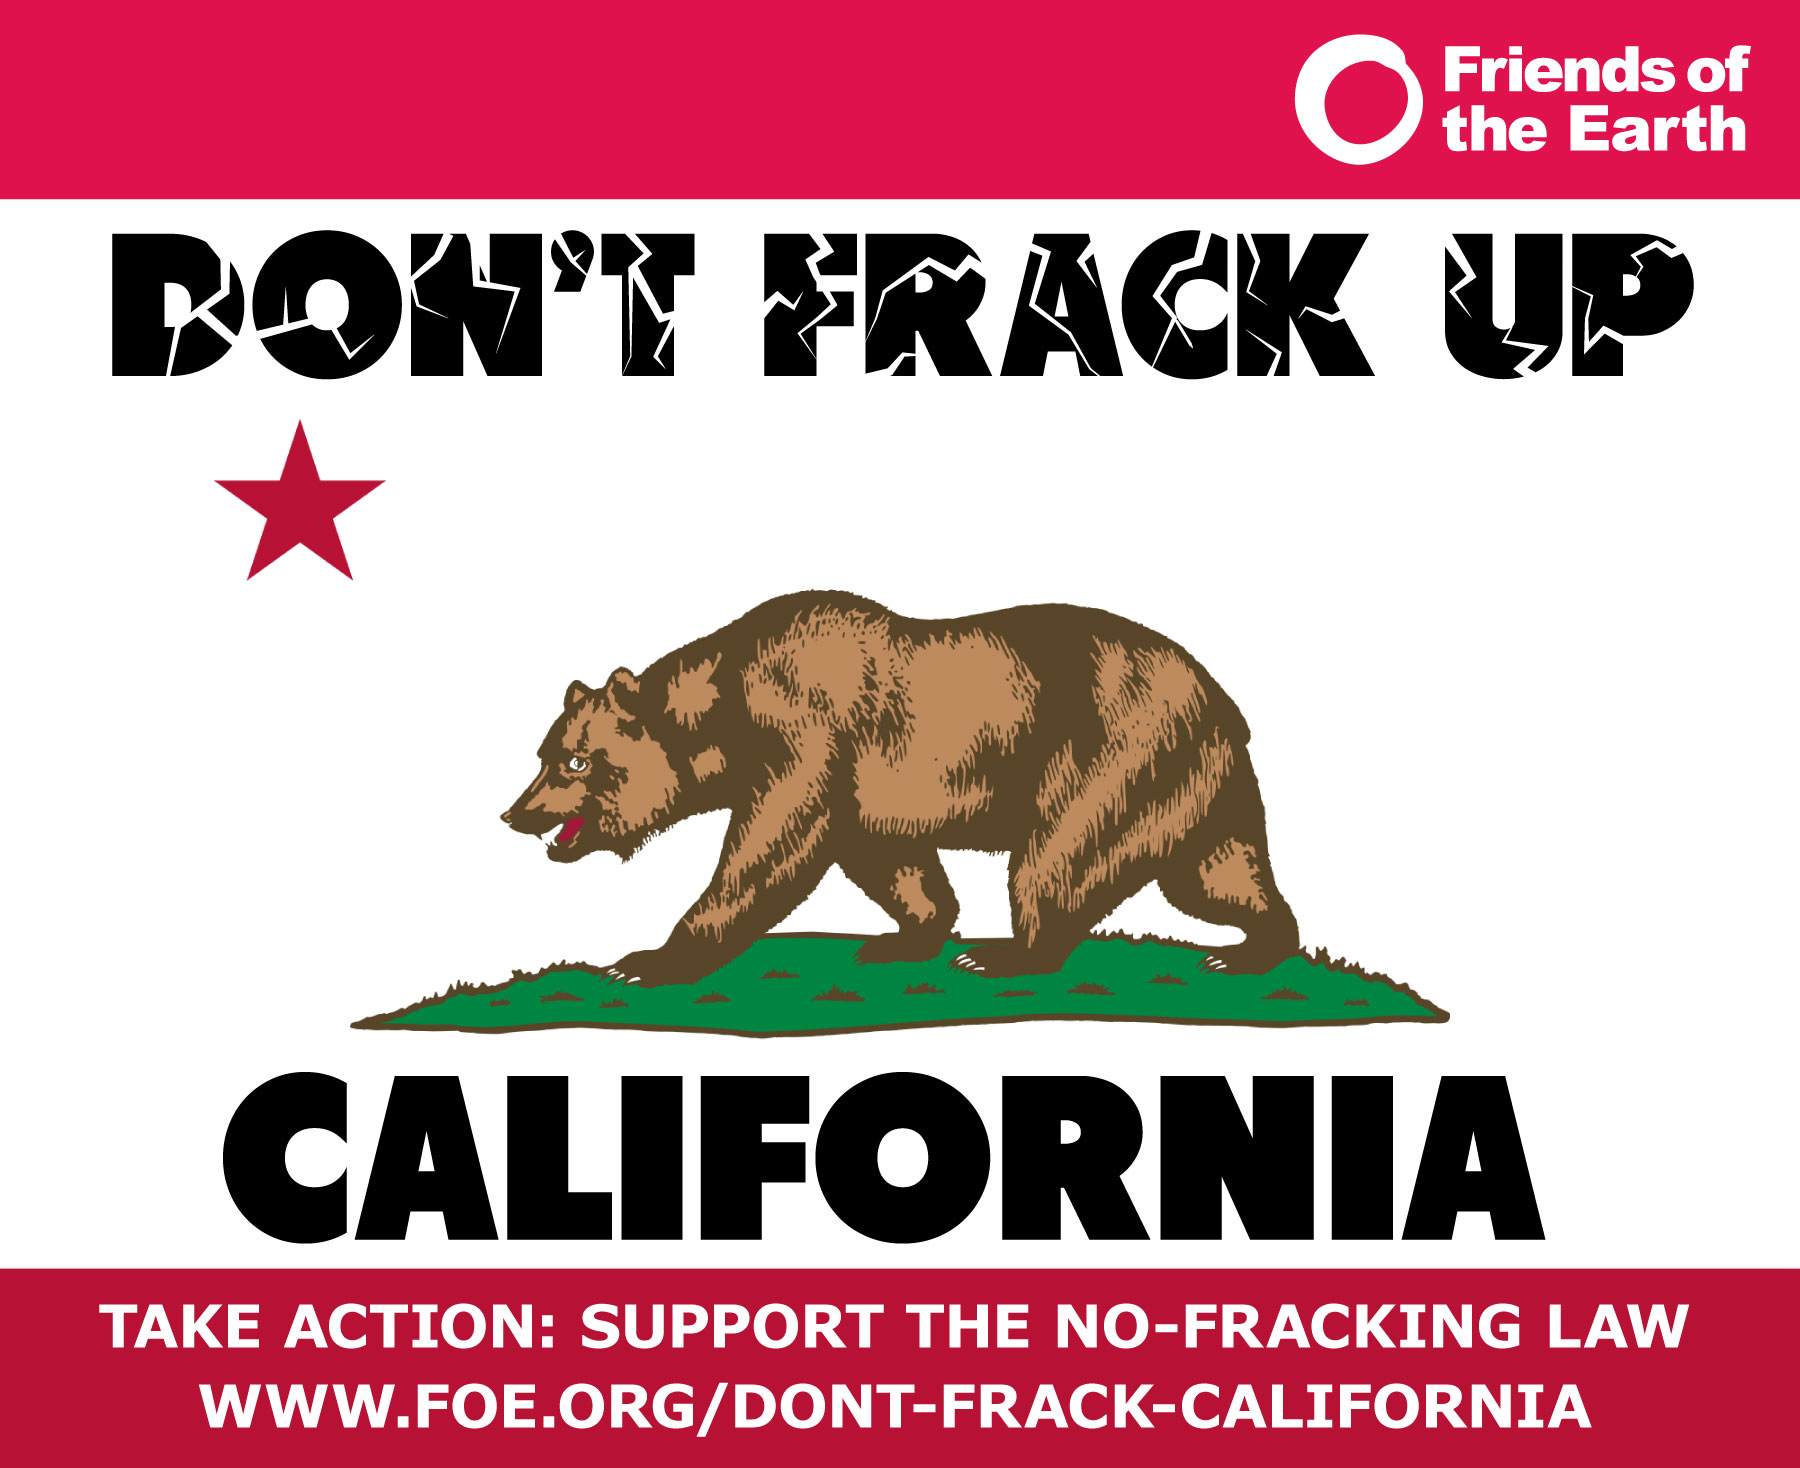 No fracking way: Keeping hydraulic fracturing out of California